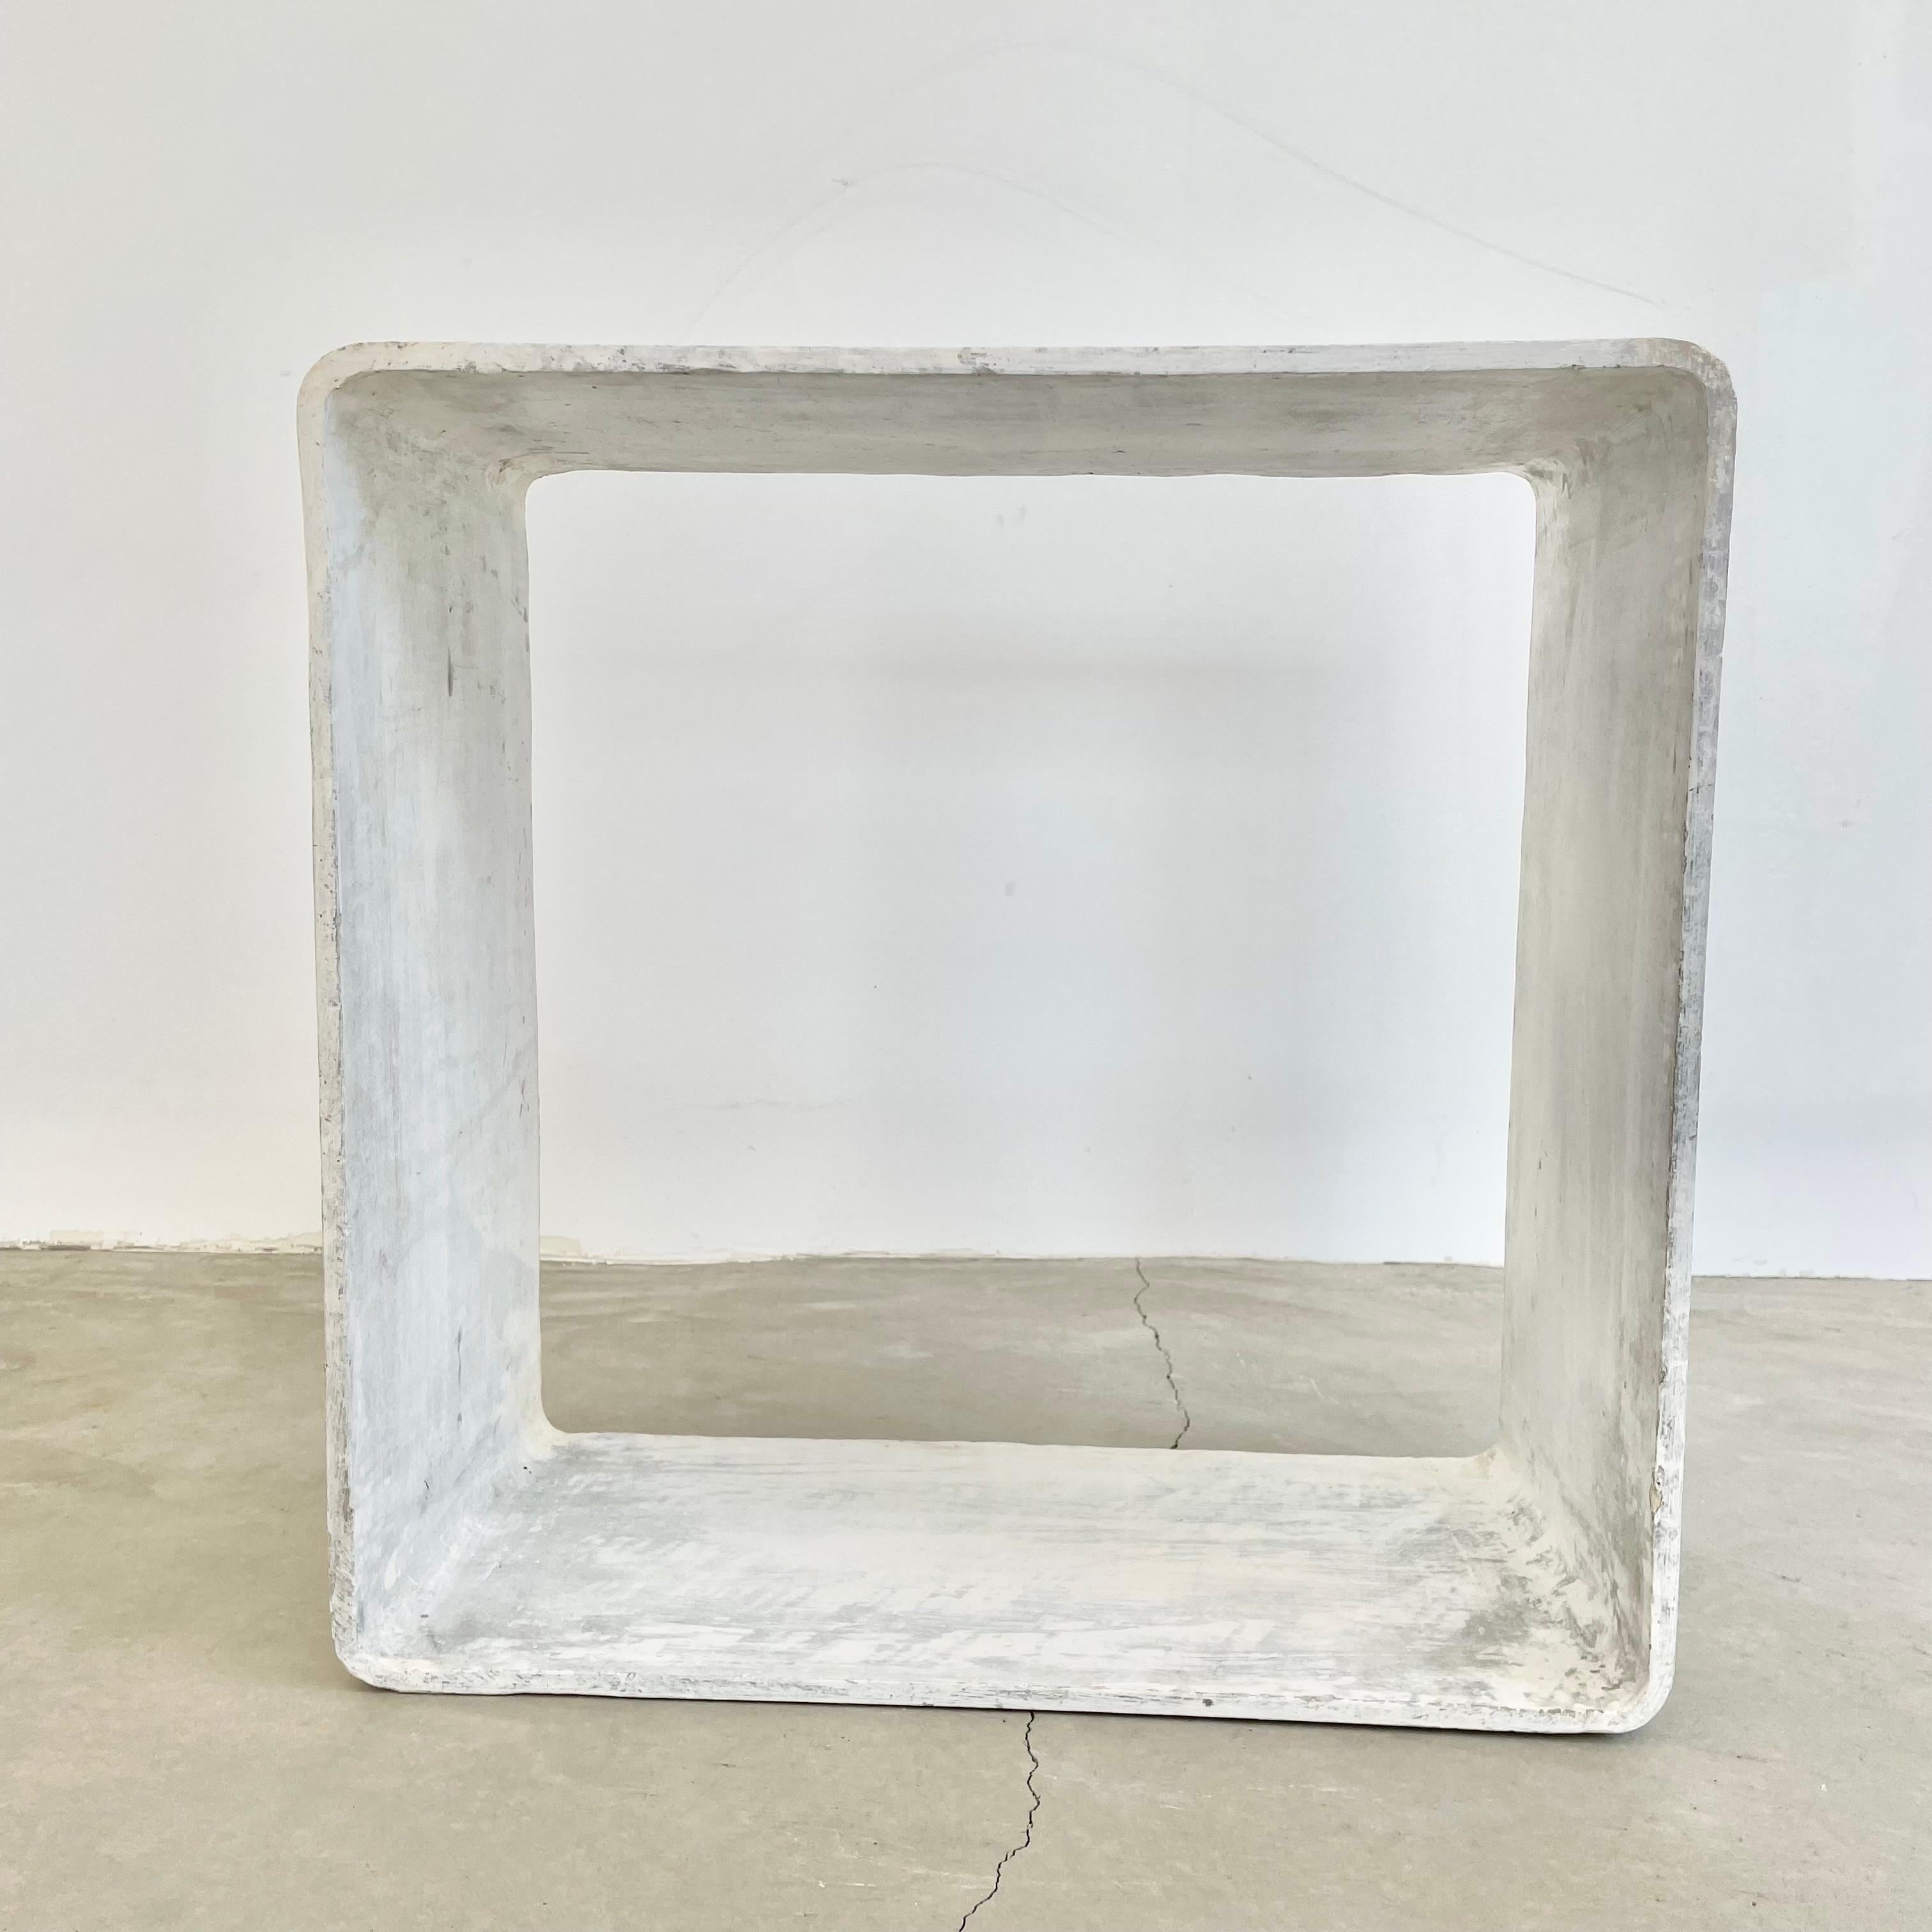 Willy Guhl Concrete Cube Side Table, 1960s Switzerland For Sale 7